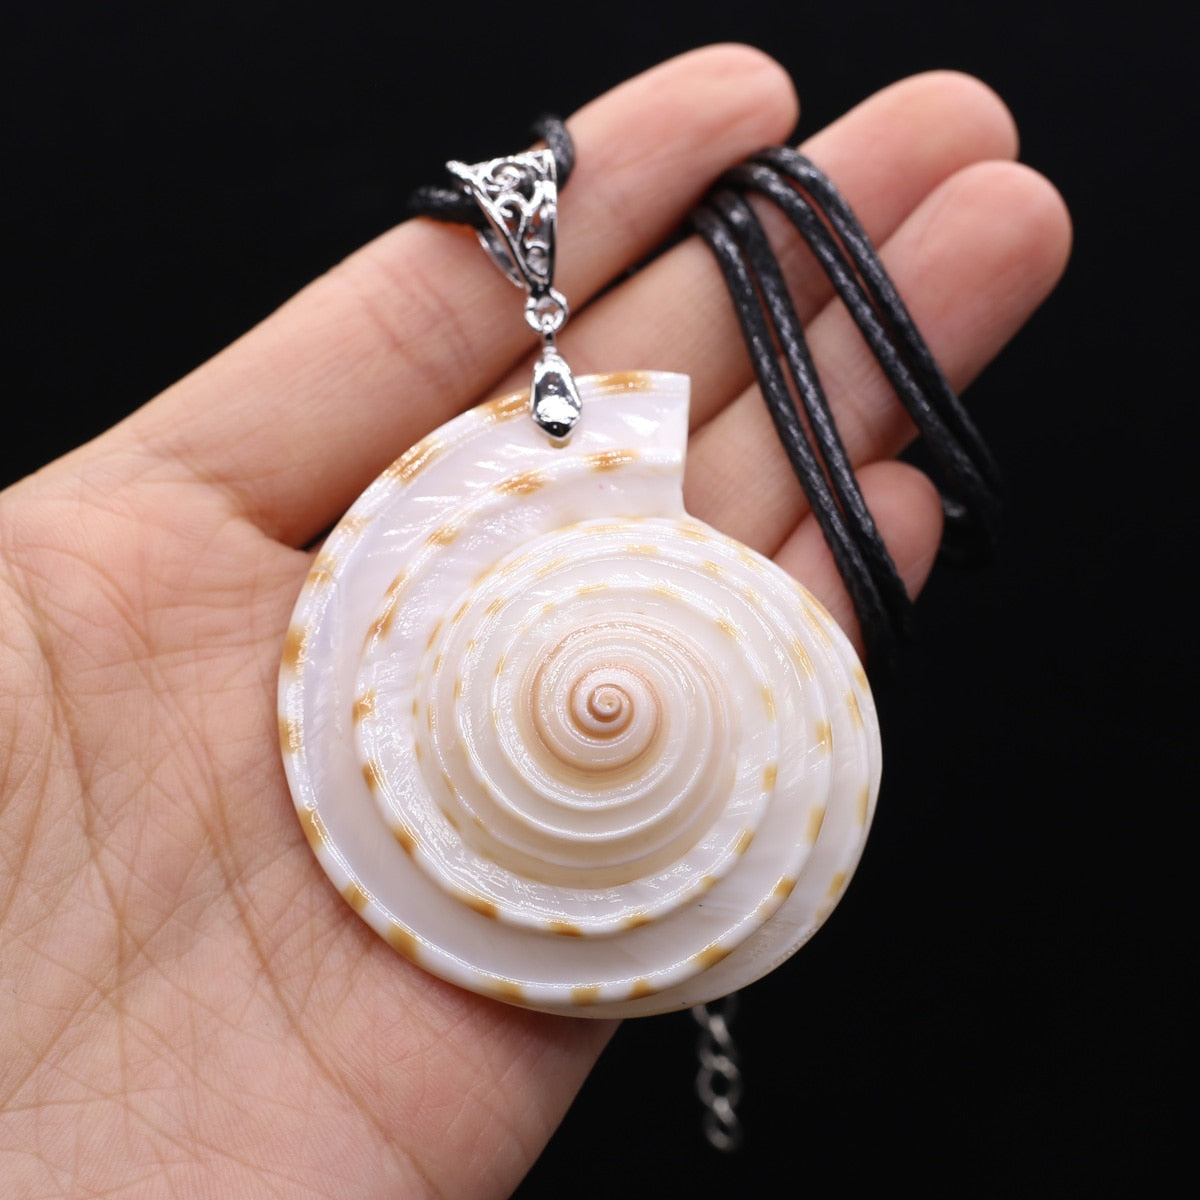 1PCS Vintage Exquisite Snail Pendant Natural Shell Conch DIY Jewelry Leather Rope Necklace Accessories Gift Wholesale - Charlie Dolly